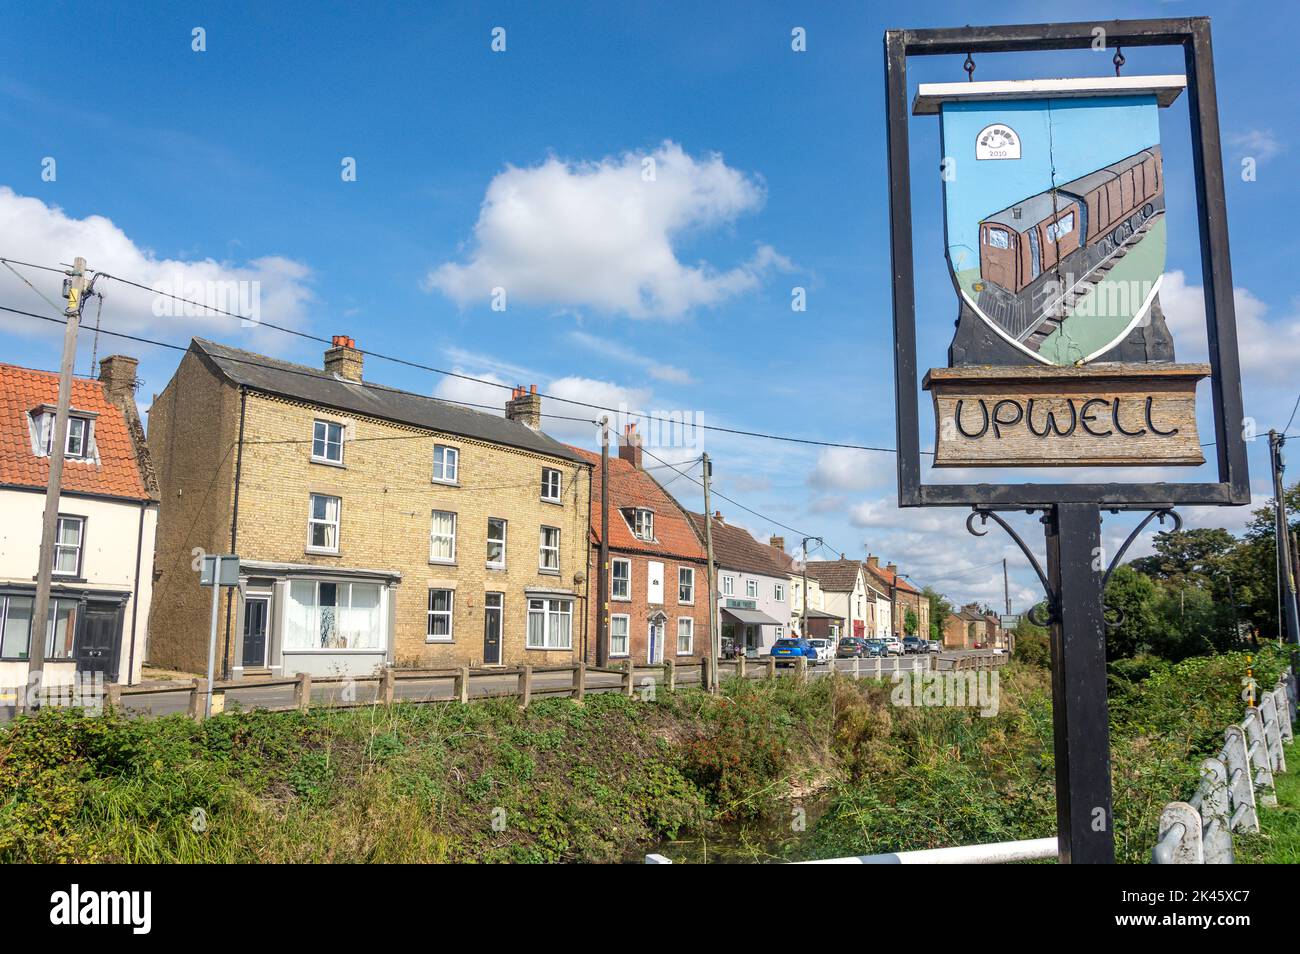 Panneau Village, New Road, Upwell, Norfolk, Angleterre, Royaume-Uni Banque D'Images